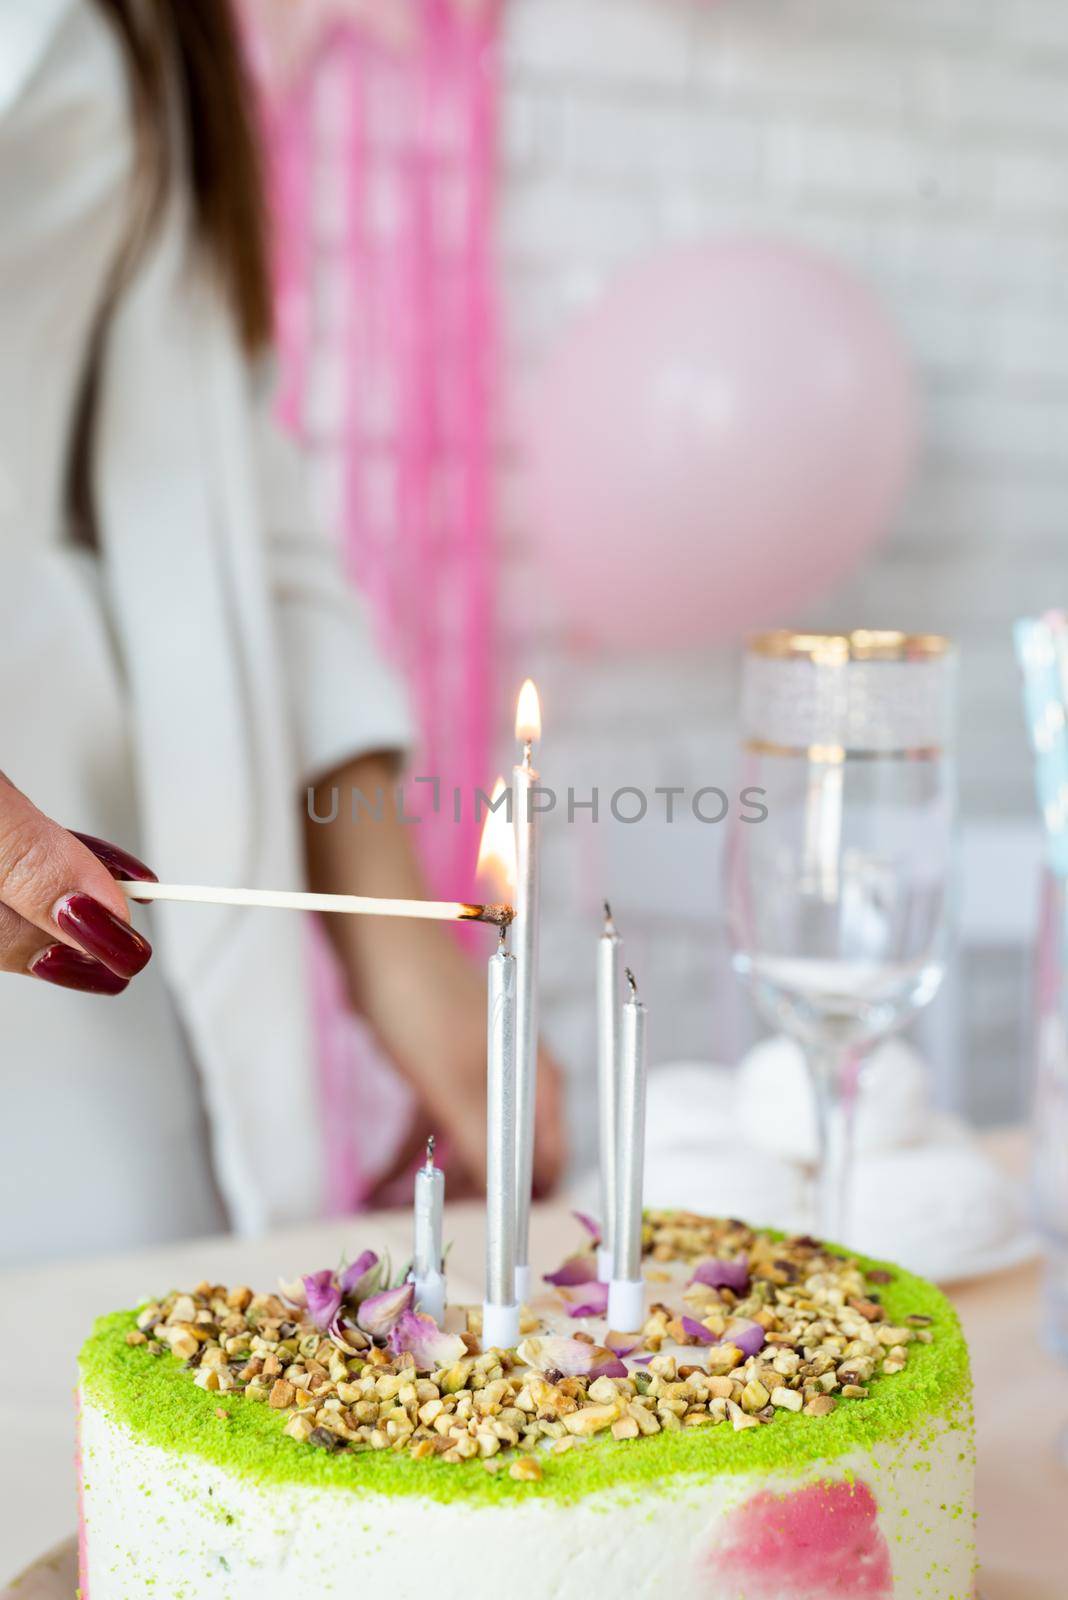 Birthday party. Birthday tables. Attractive woman in white party clothes preparing birthday table with cakes, cakepops, macarons and other sweets, lighting the candles